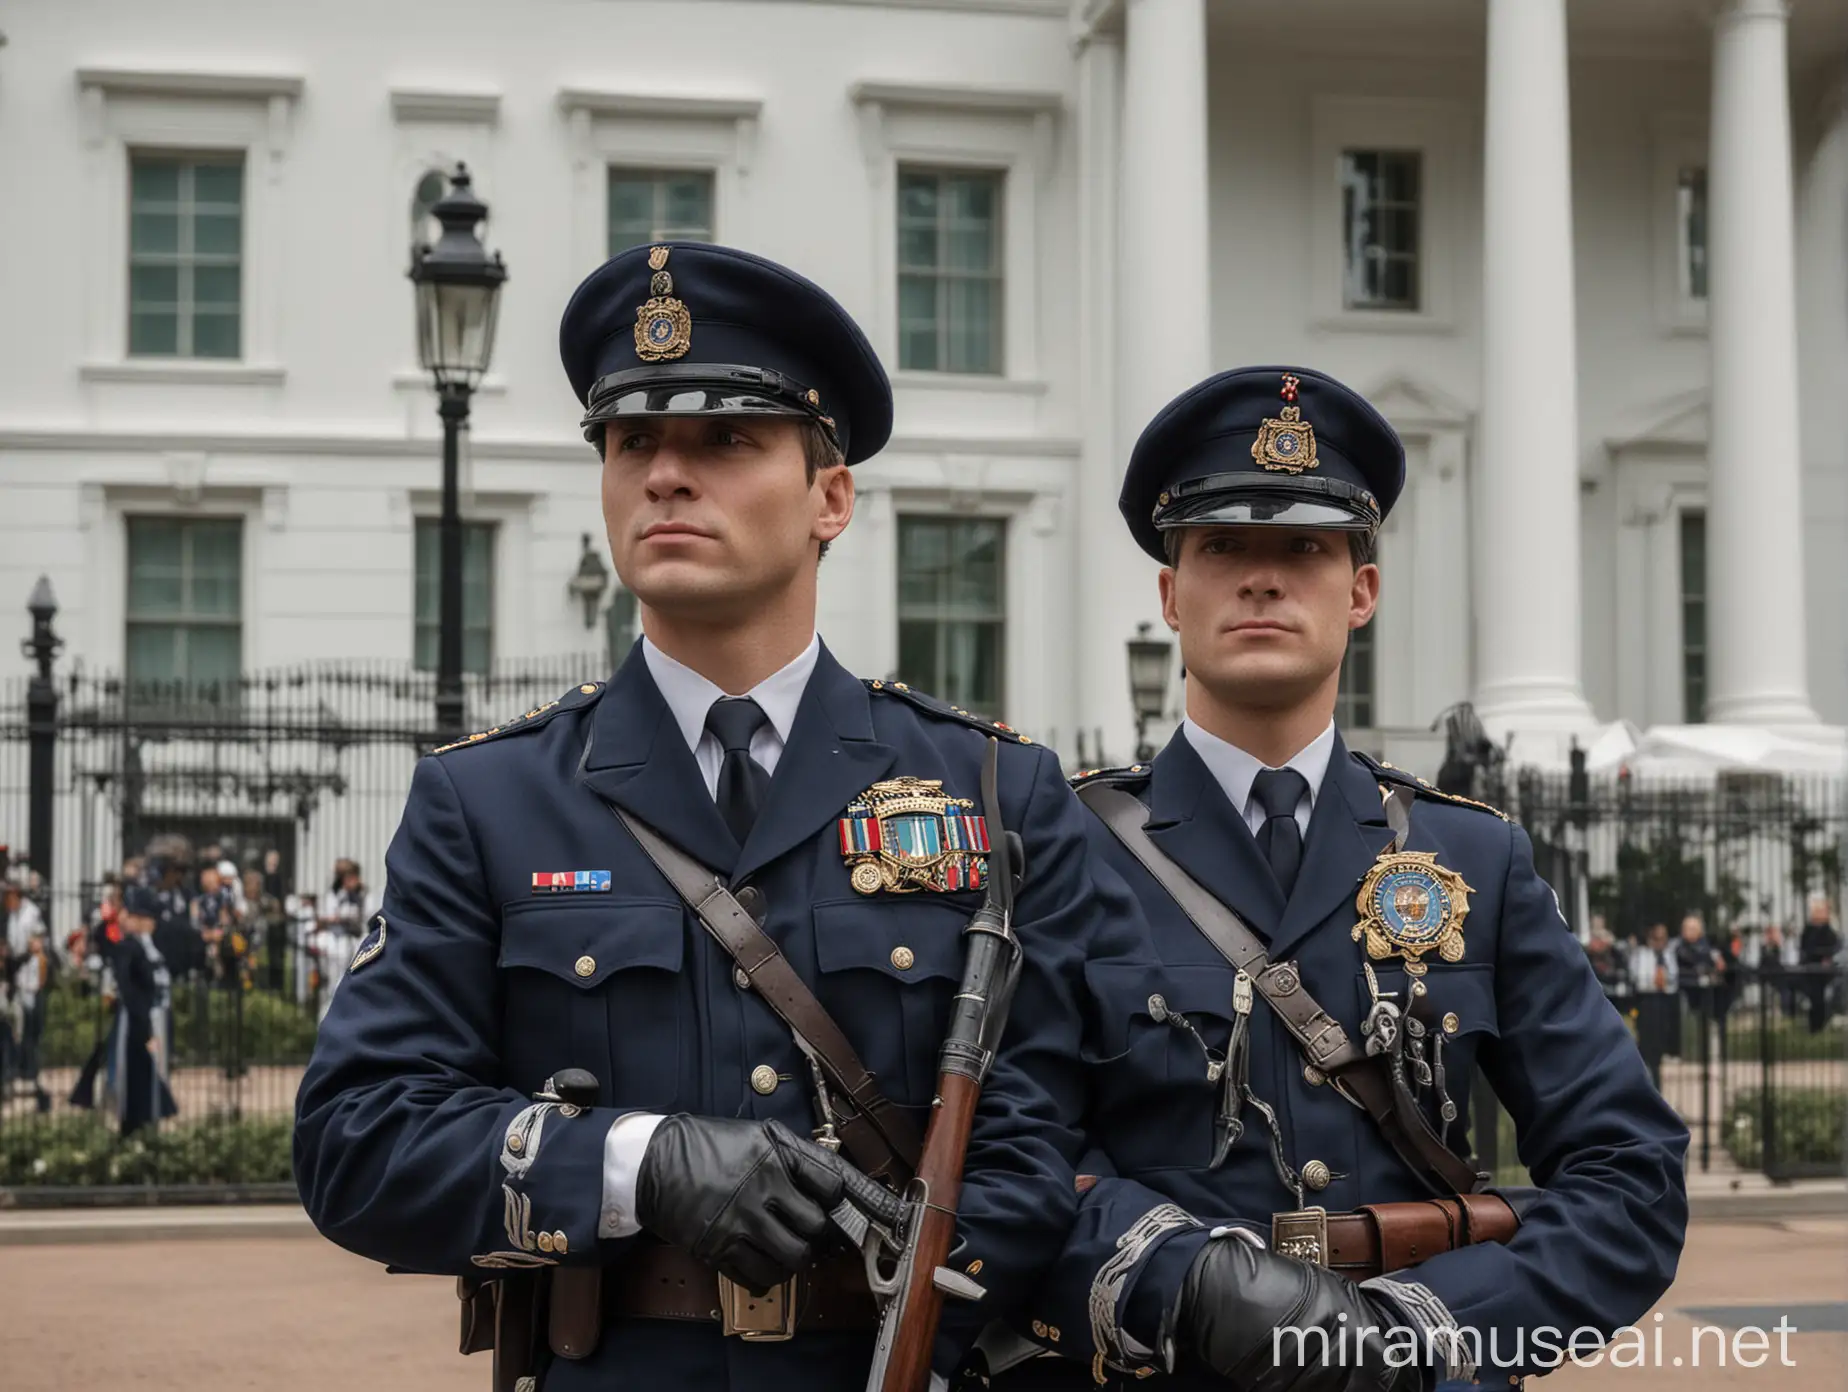 Security Guards in DarkBlue Uniforms Protecting the White House